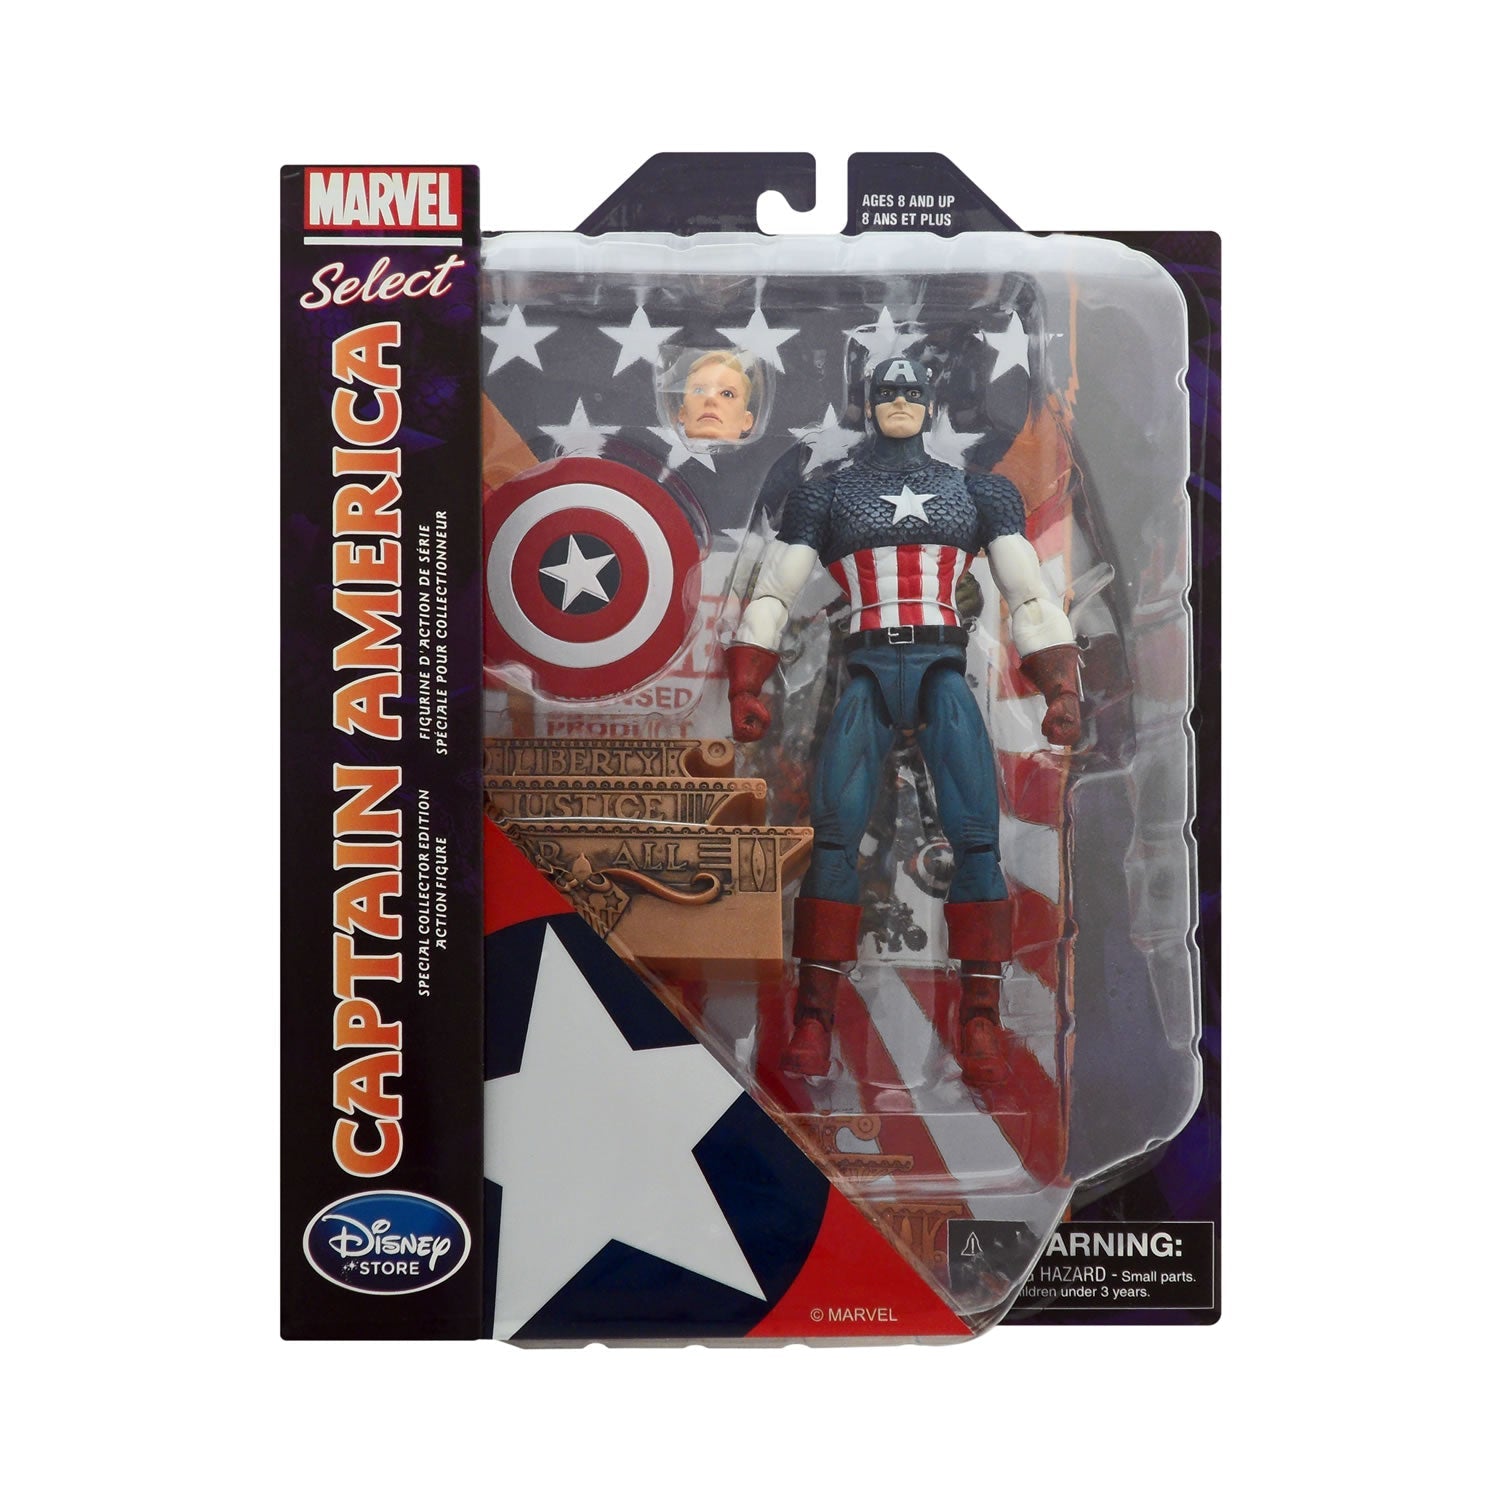 Marvel Select Exclusive Captain America Action Figure – Action